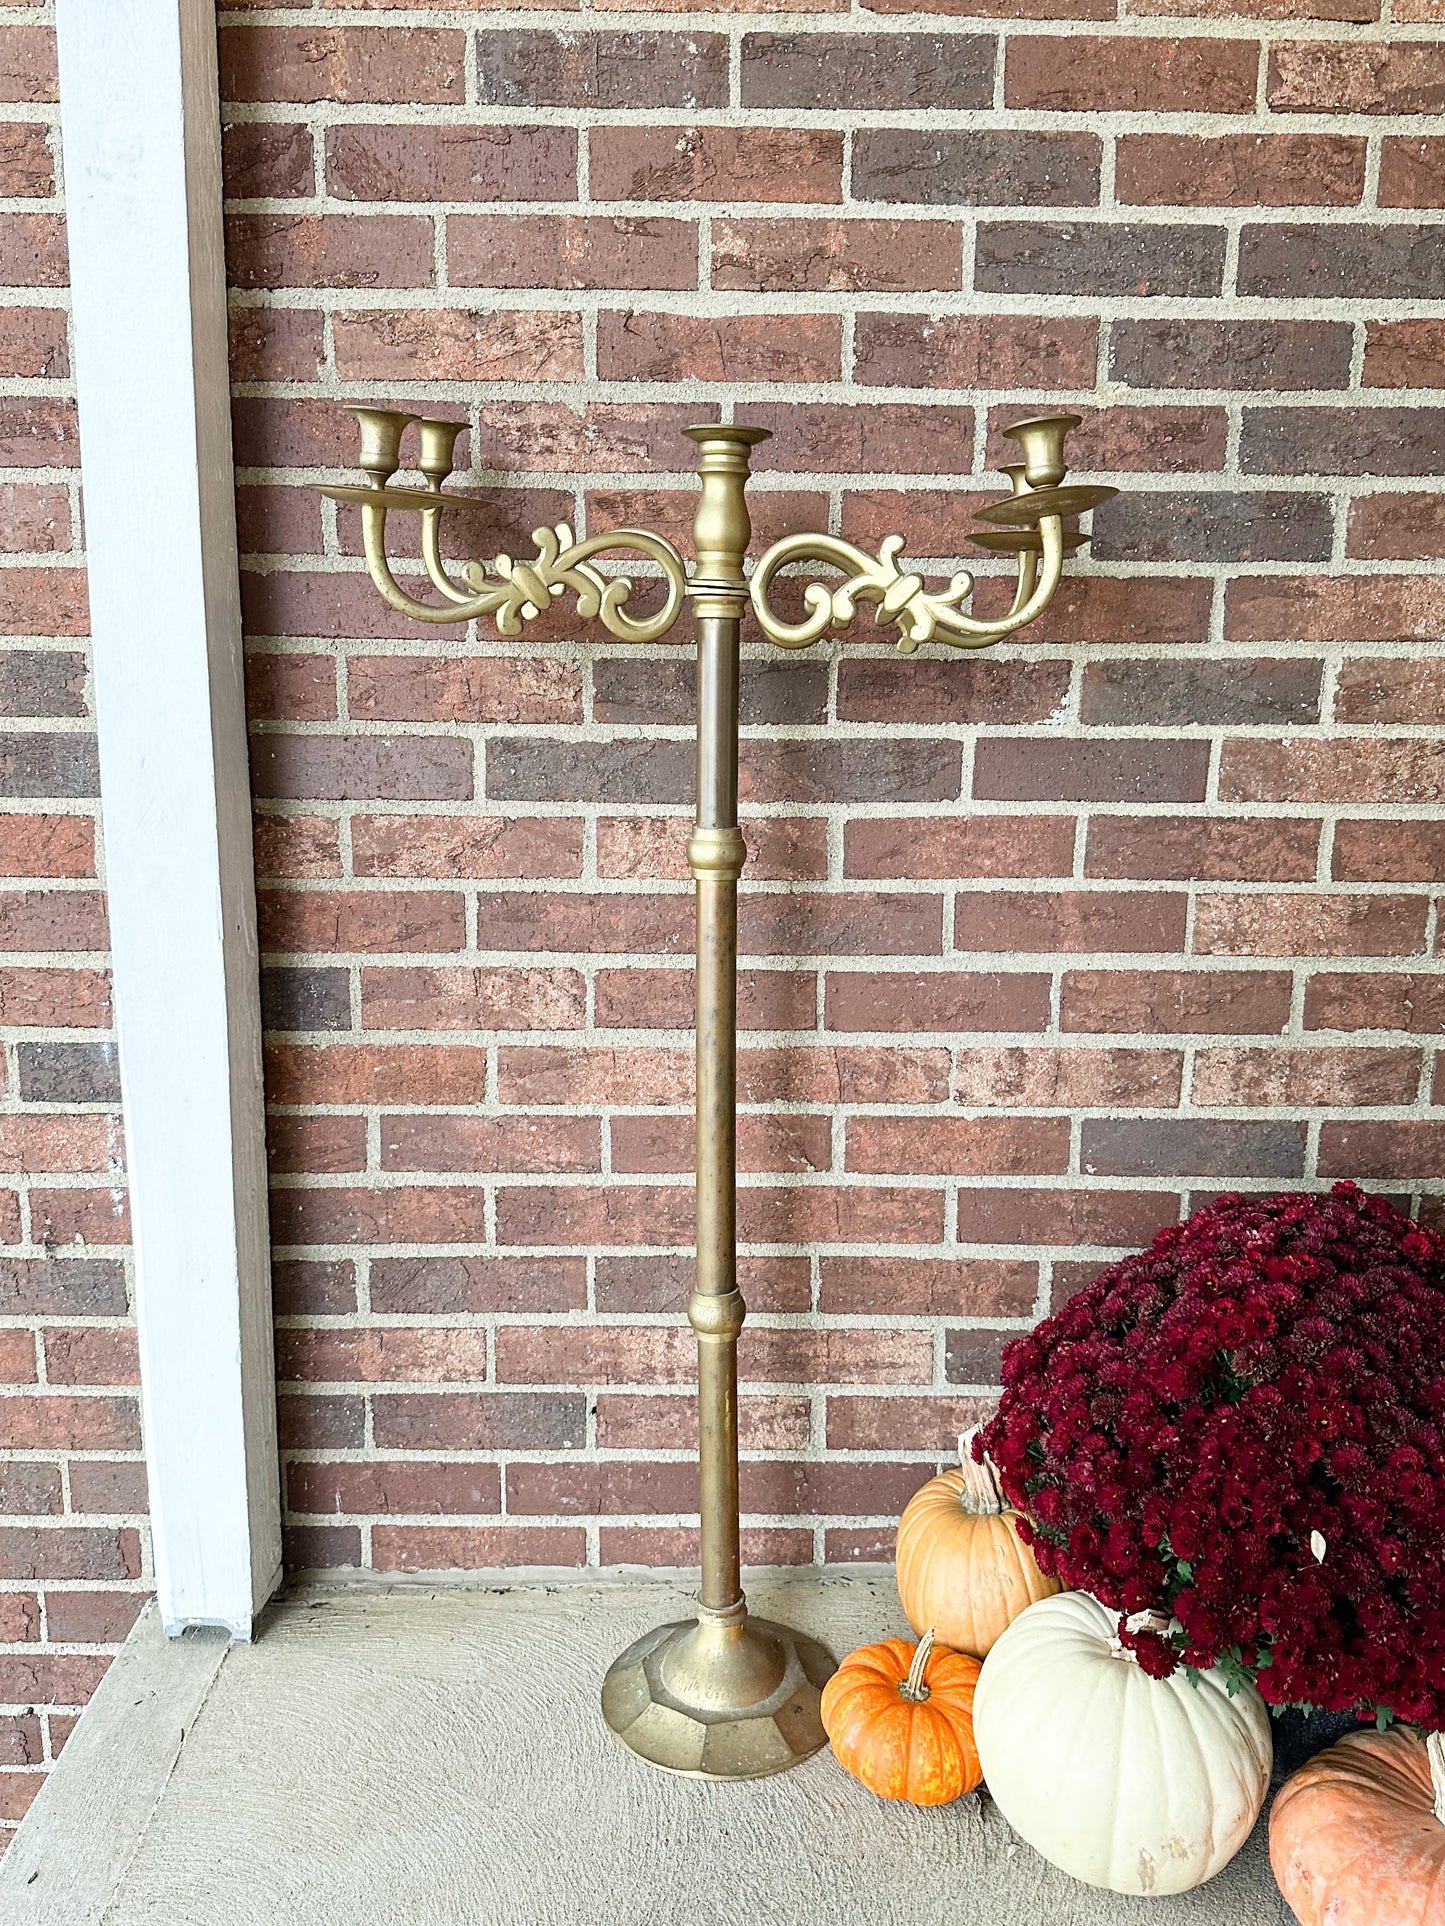 Standing Brass Candle Holder